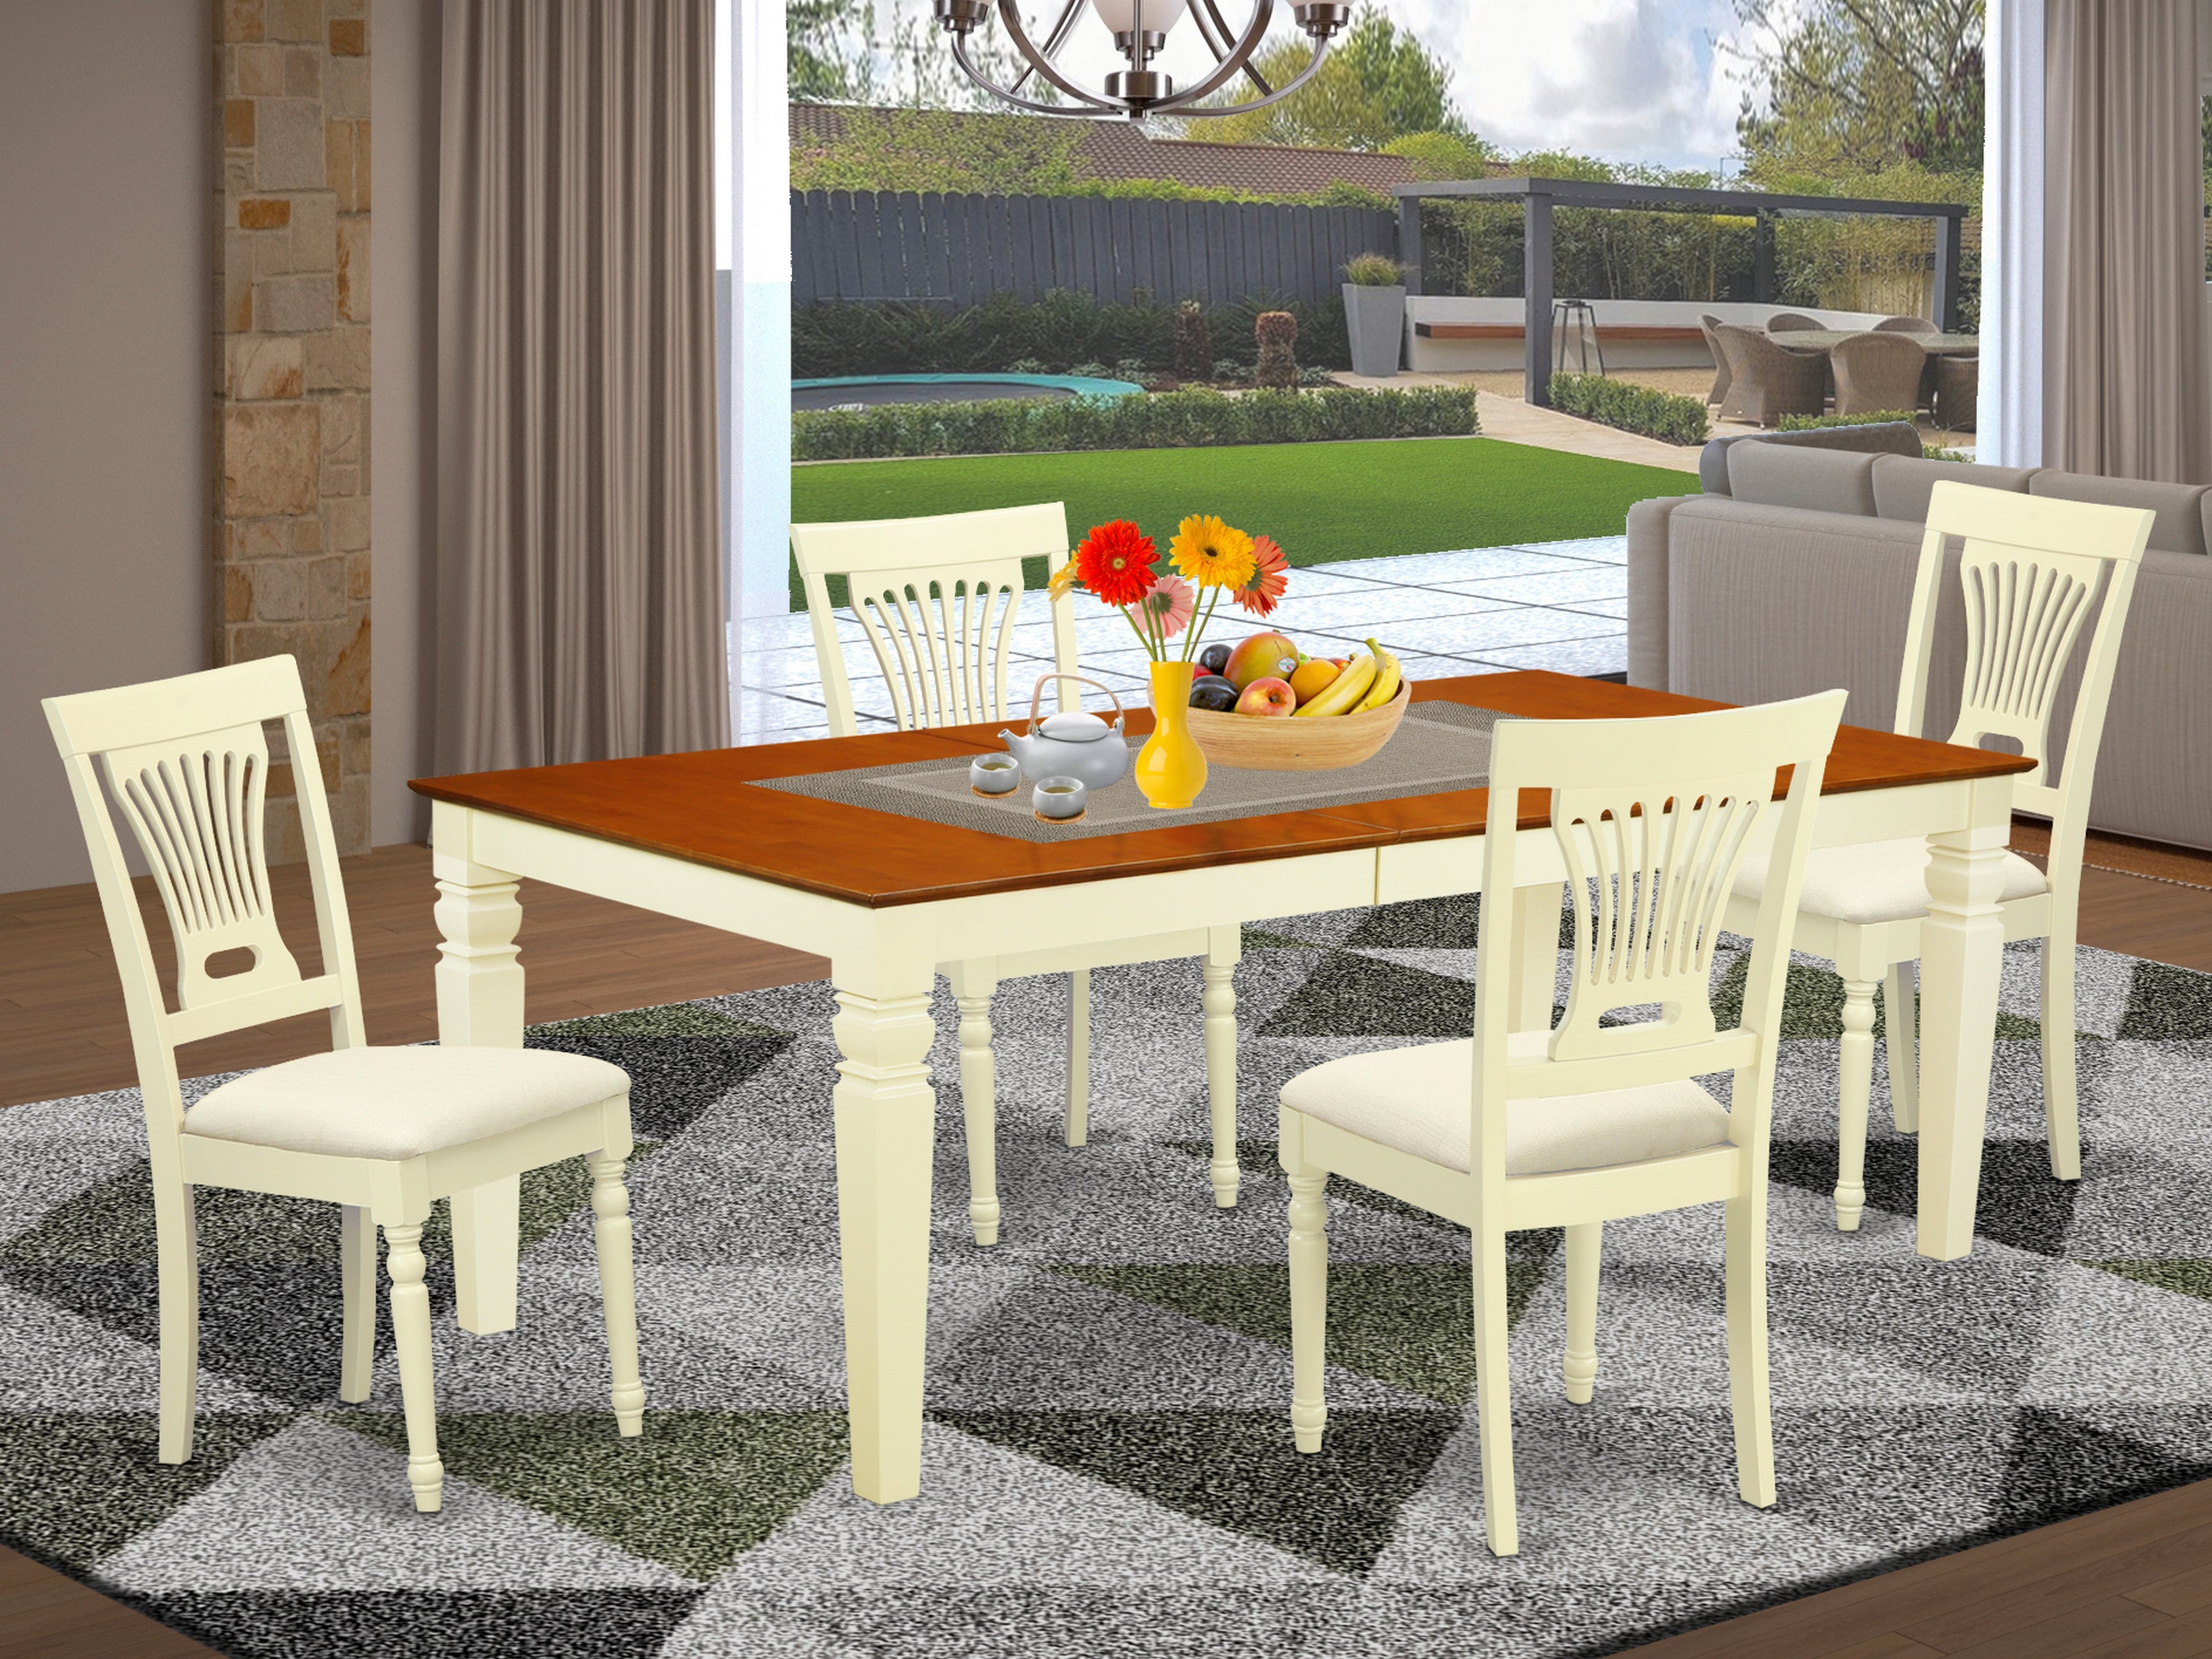 LGPL5-BMK-C 5 PC dinette set with a Dining Table and 4 Kitchen Chairs in Buttermilk and Cherry